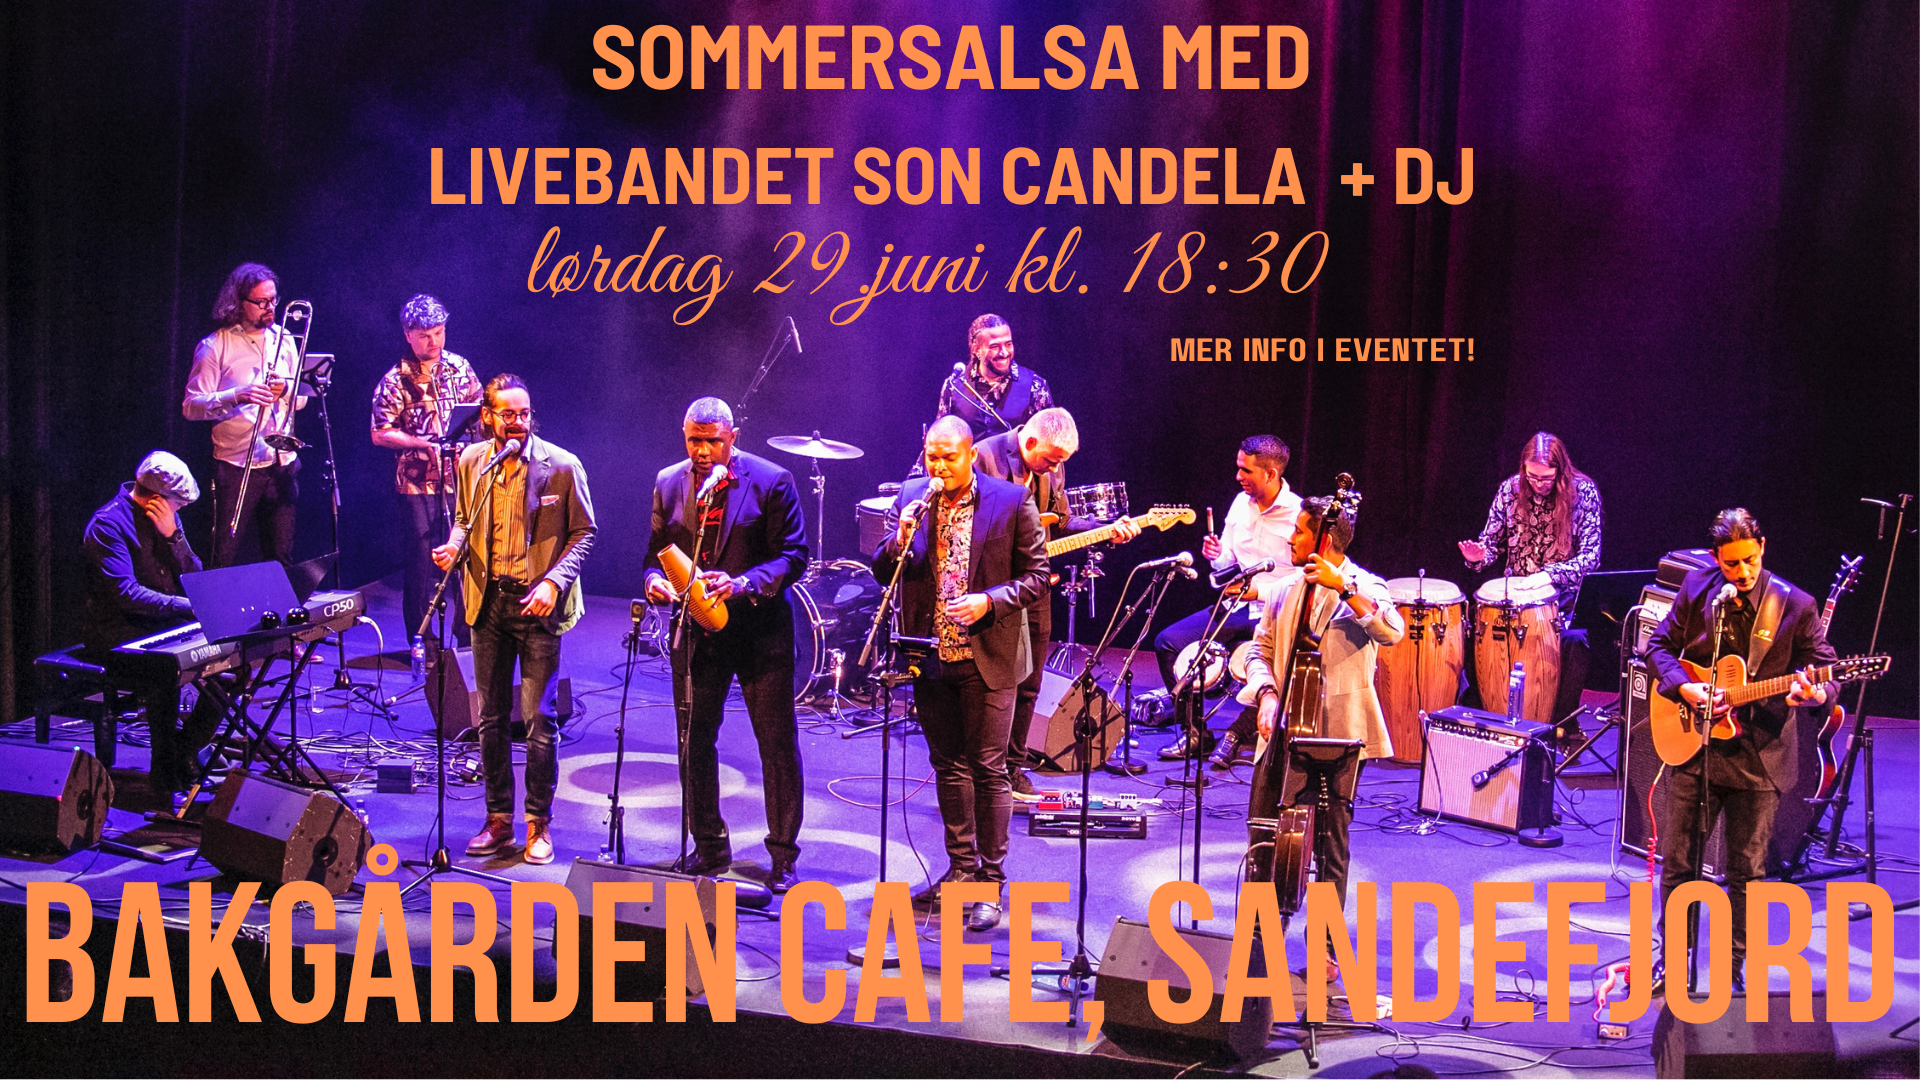 Save the date for Sommersalsa 